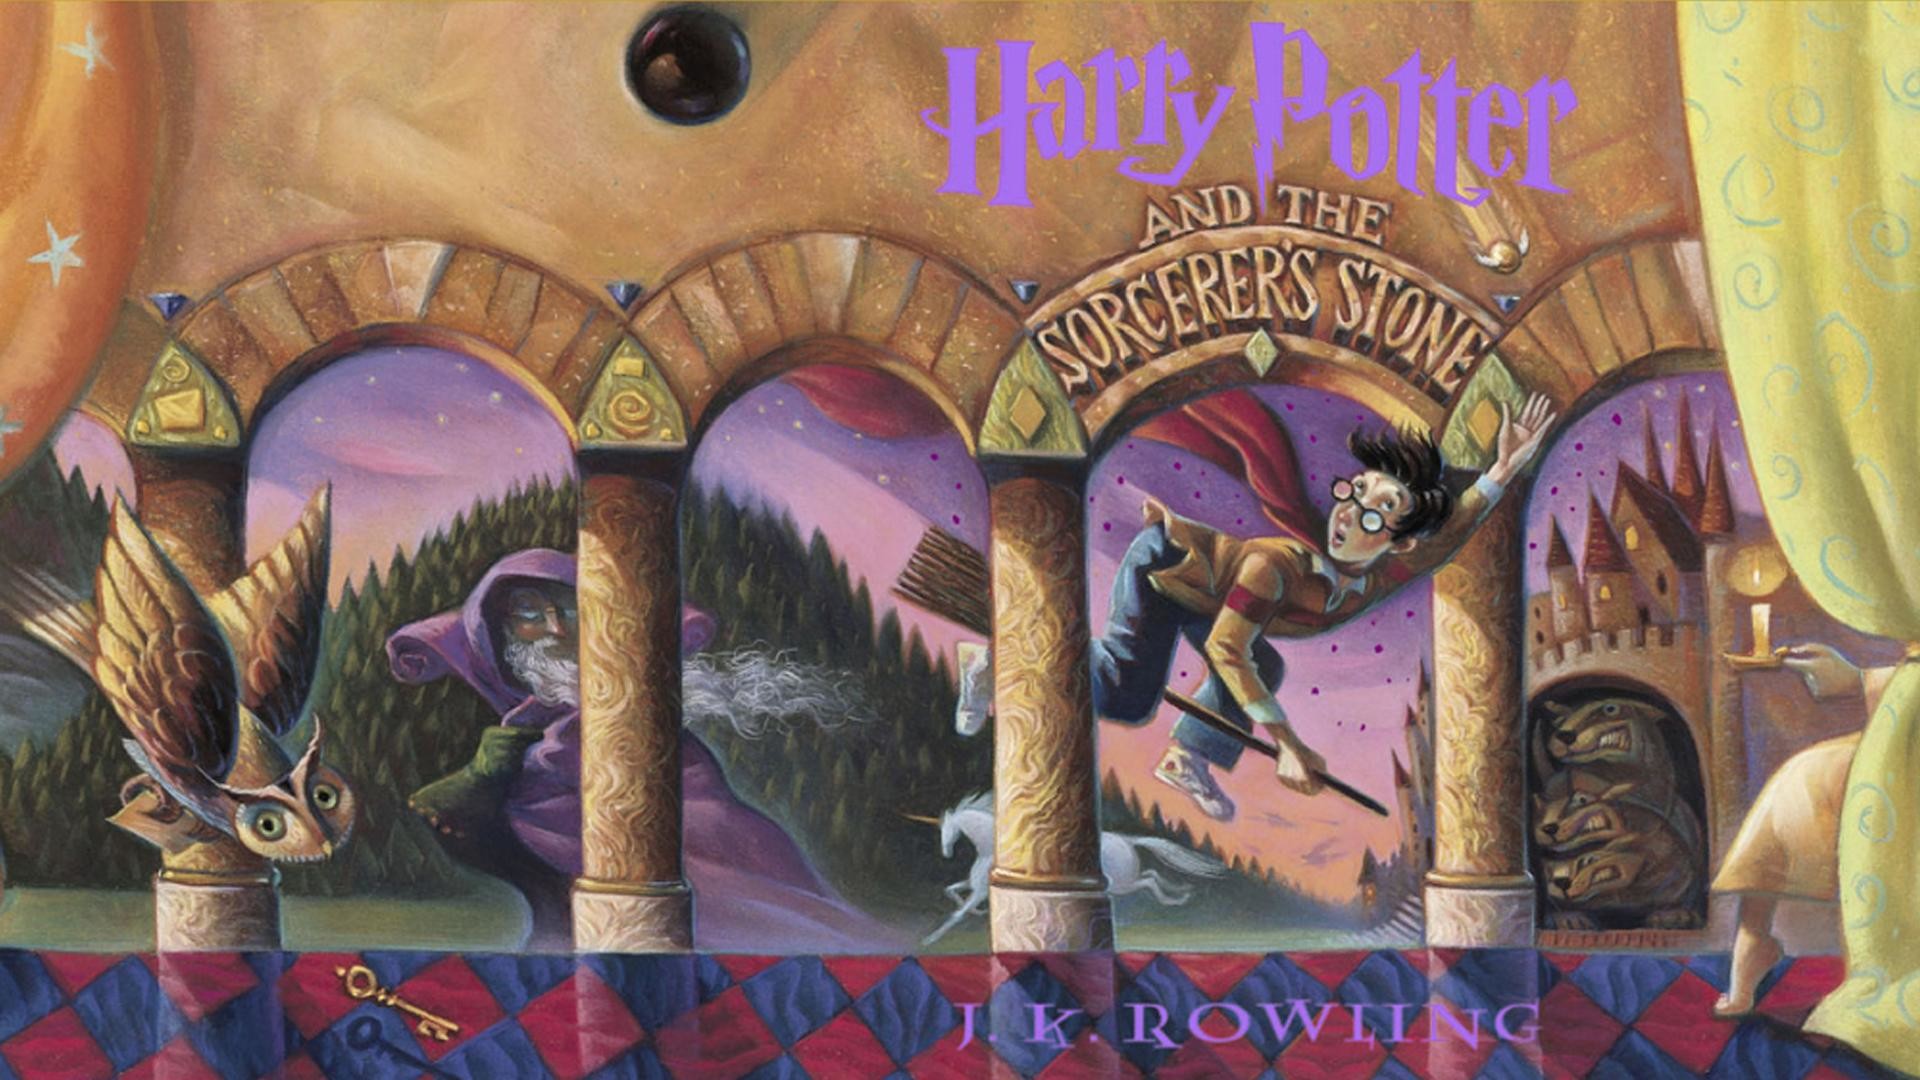 1920x1080 Harry Potter and the Sorcerer's Stone